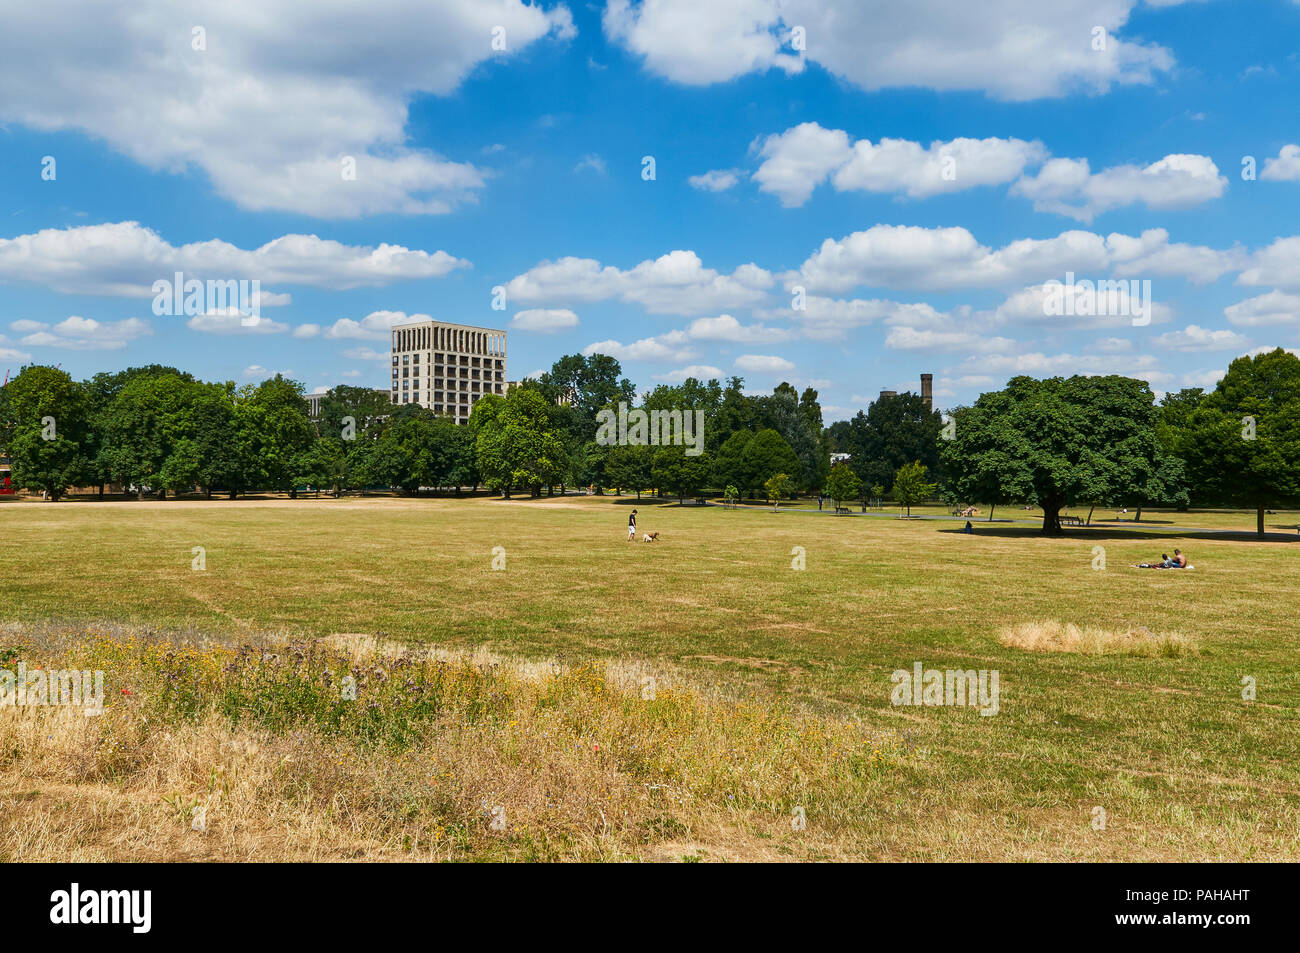 Clissold Park, London UK, during the July 2018 heatwave, with blue sky and white clouds Stock Photo